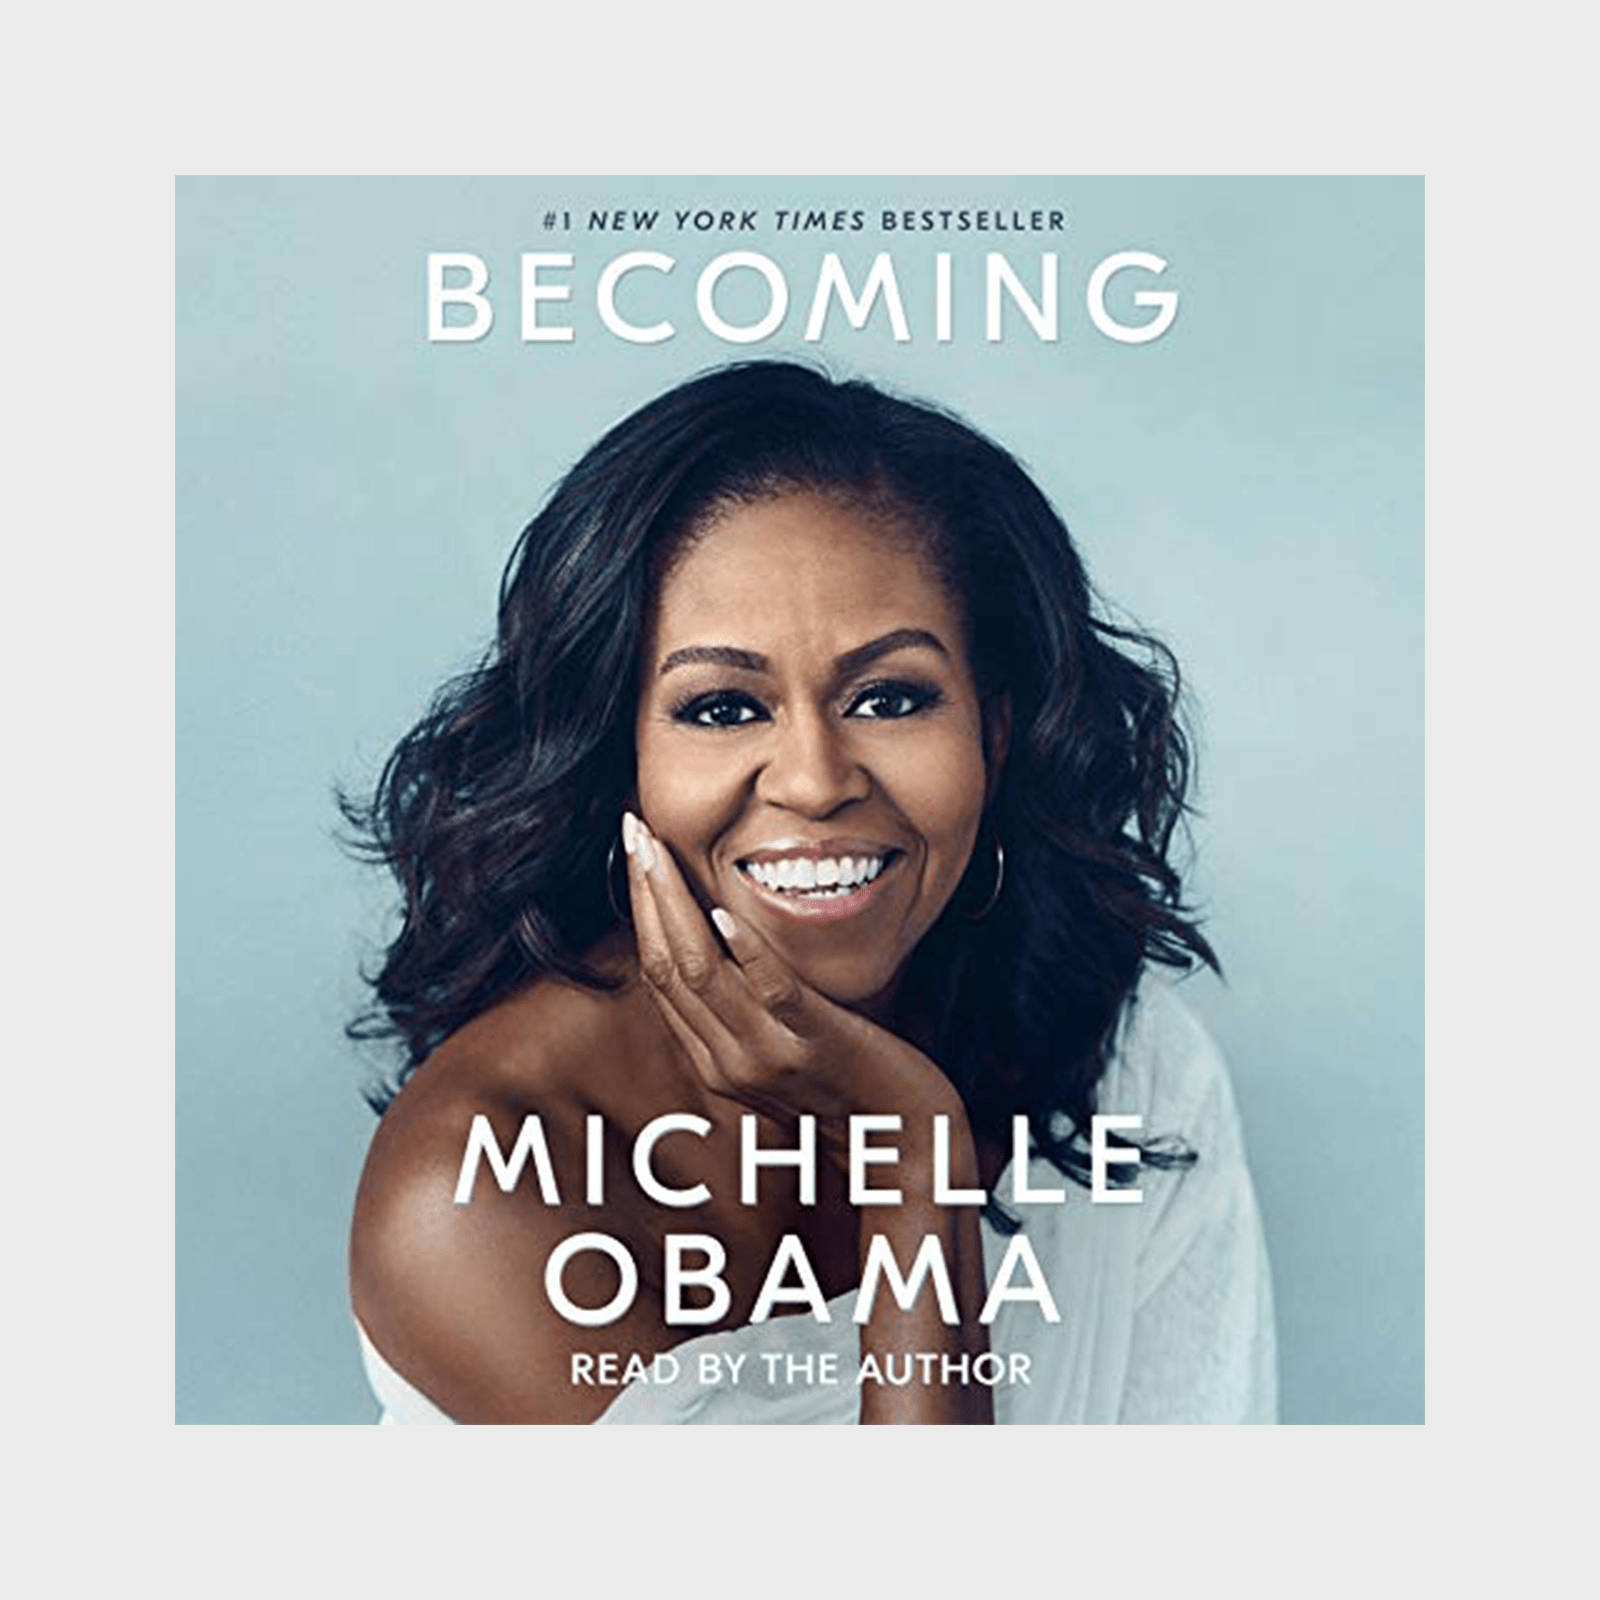 <h3><strong><em>Becoming </em>by Michelle Obama</strong></h3> <p>The former First Lady sold out stadiums for her book tour when she rolled out this memoir at the end of 2018. If by chance you haven't read (or listened to) it yet, now should be the time, as it's one of the best <a href="https://www.rd.com/list/books-by-black-authors/" rel="noopener noreferrer">books by Black authors</a>. Michelle Obama narrates her own story, from growing up in Chicago to her time at Harvard Law School to her eight years as First Lady. Not to mention, it's one of the best audiobooks you could listen to: <a href="https://www.amazon.com/Becoming-Michelle-Obama-audiobook/dp/B07B3JQZCL/" rel="noopener noreferrer"><em>Becoming</em></a> won the 2020 Grammy for Best Spoken World Album. Is there anything she can't do?!</p> <p class="listicle-page__cta-button-shop"><a class="shop-btn" href="https://www.amazon.com/Becoming-Michelle-Obama-audiobook/dp/B07B3JQZCL/">Shop Now</a></p>